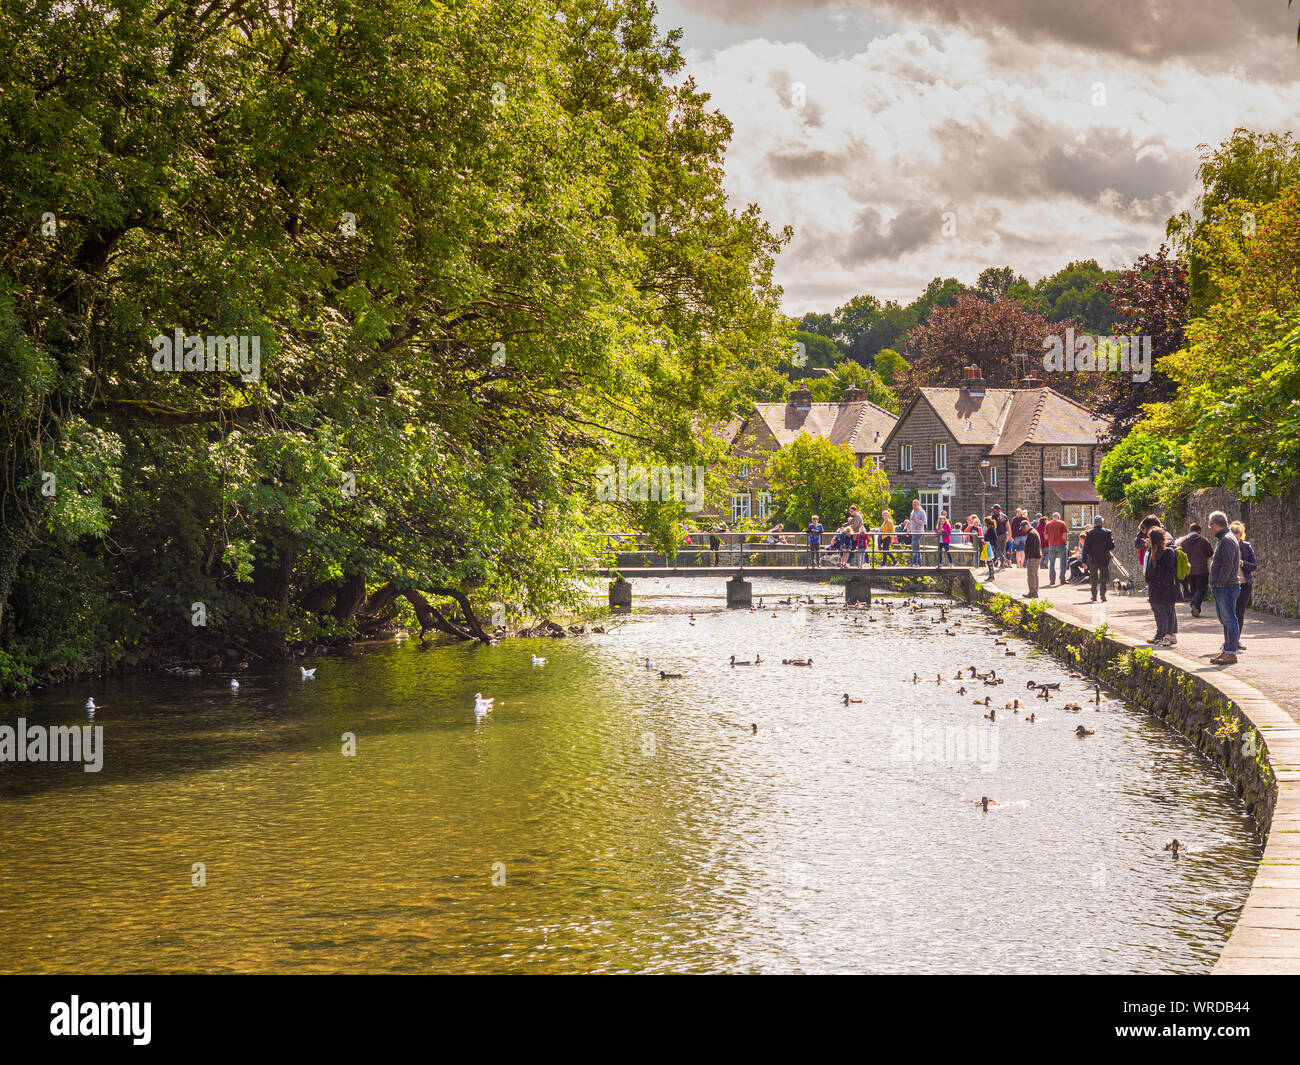 River Wye in Bakewell, a market town and civil parish in the Derbyshire Dales district of Derbyshire, UK. Stock Photo